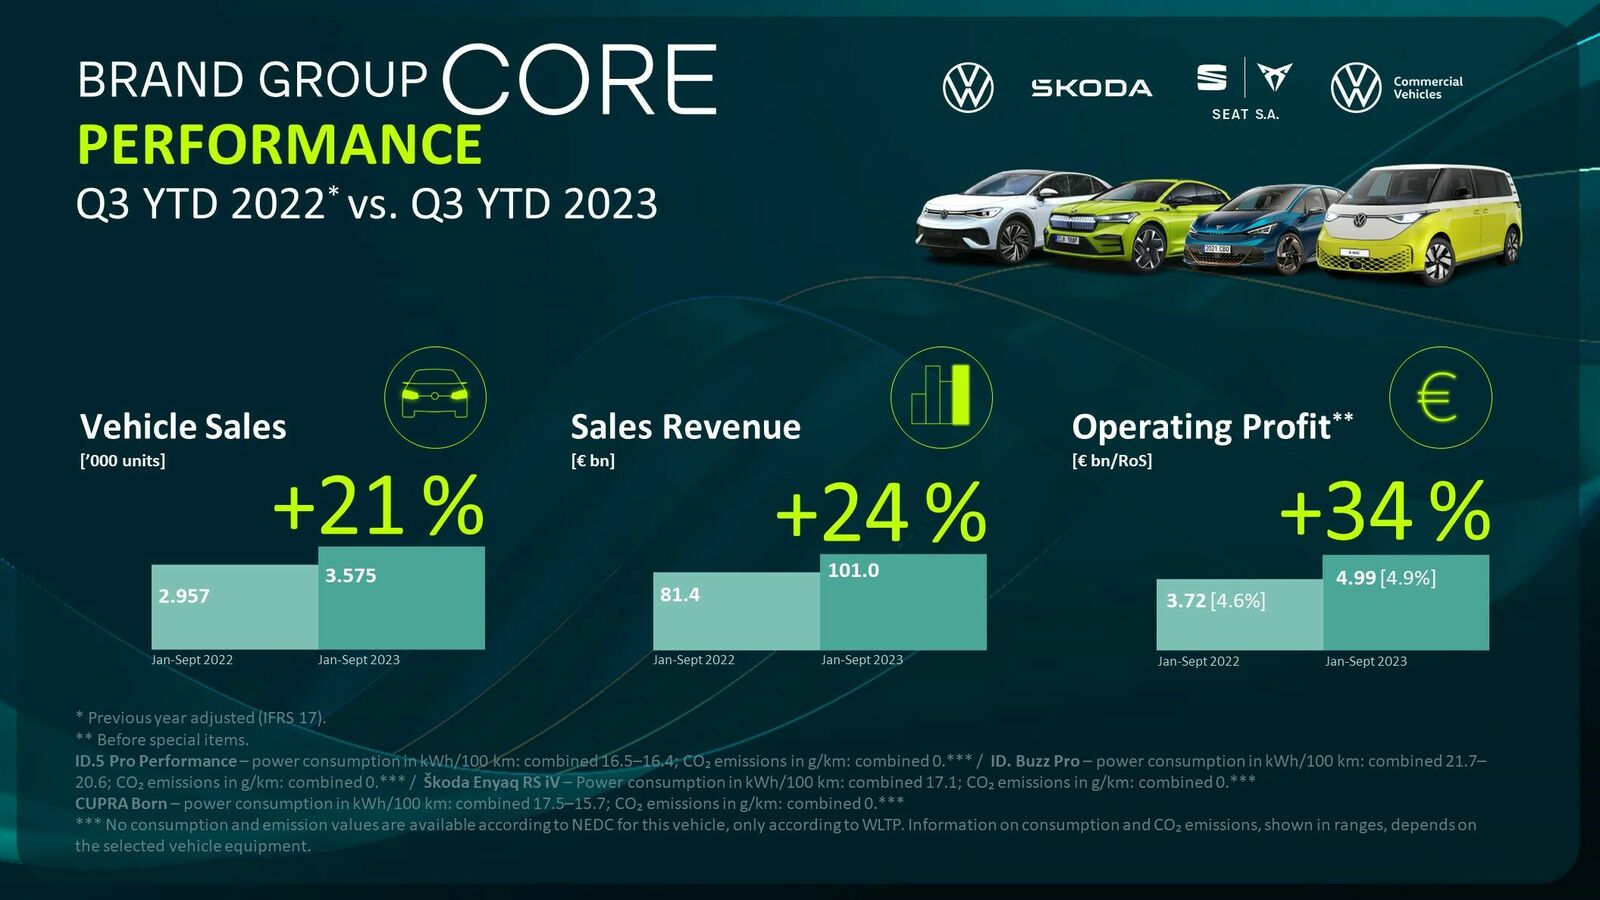 An infographic with figures on brand group core performance